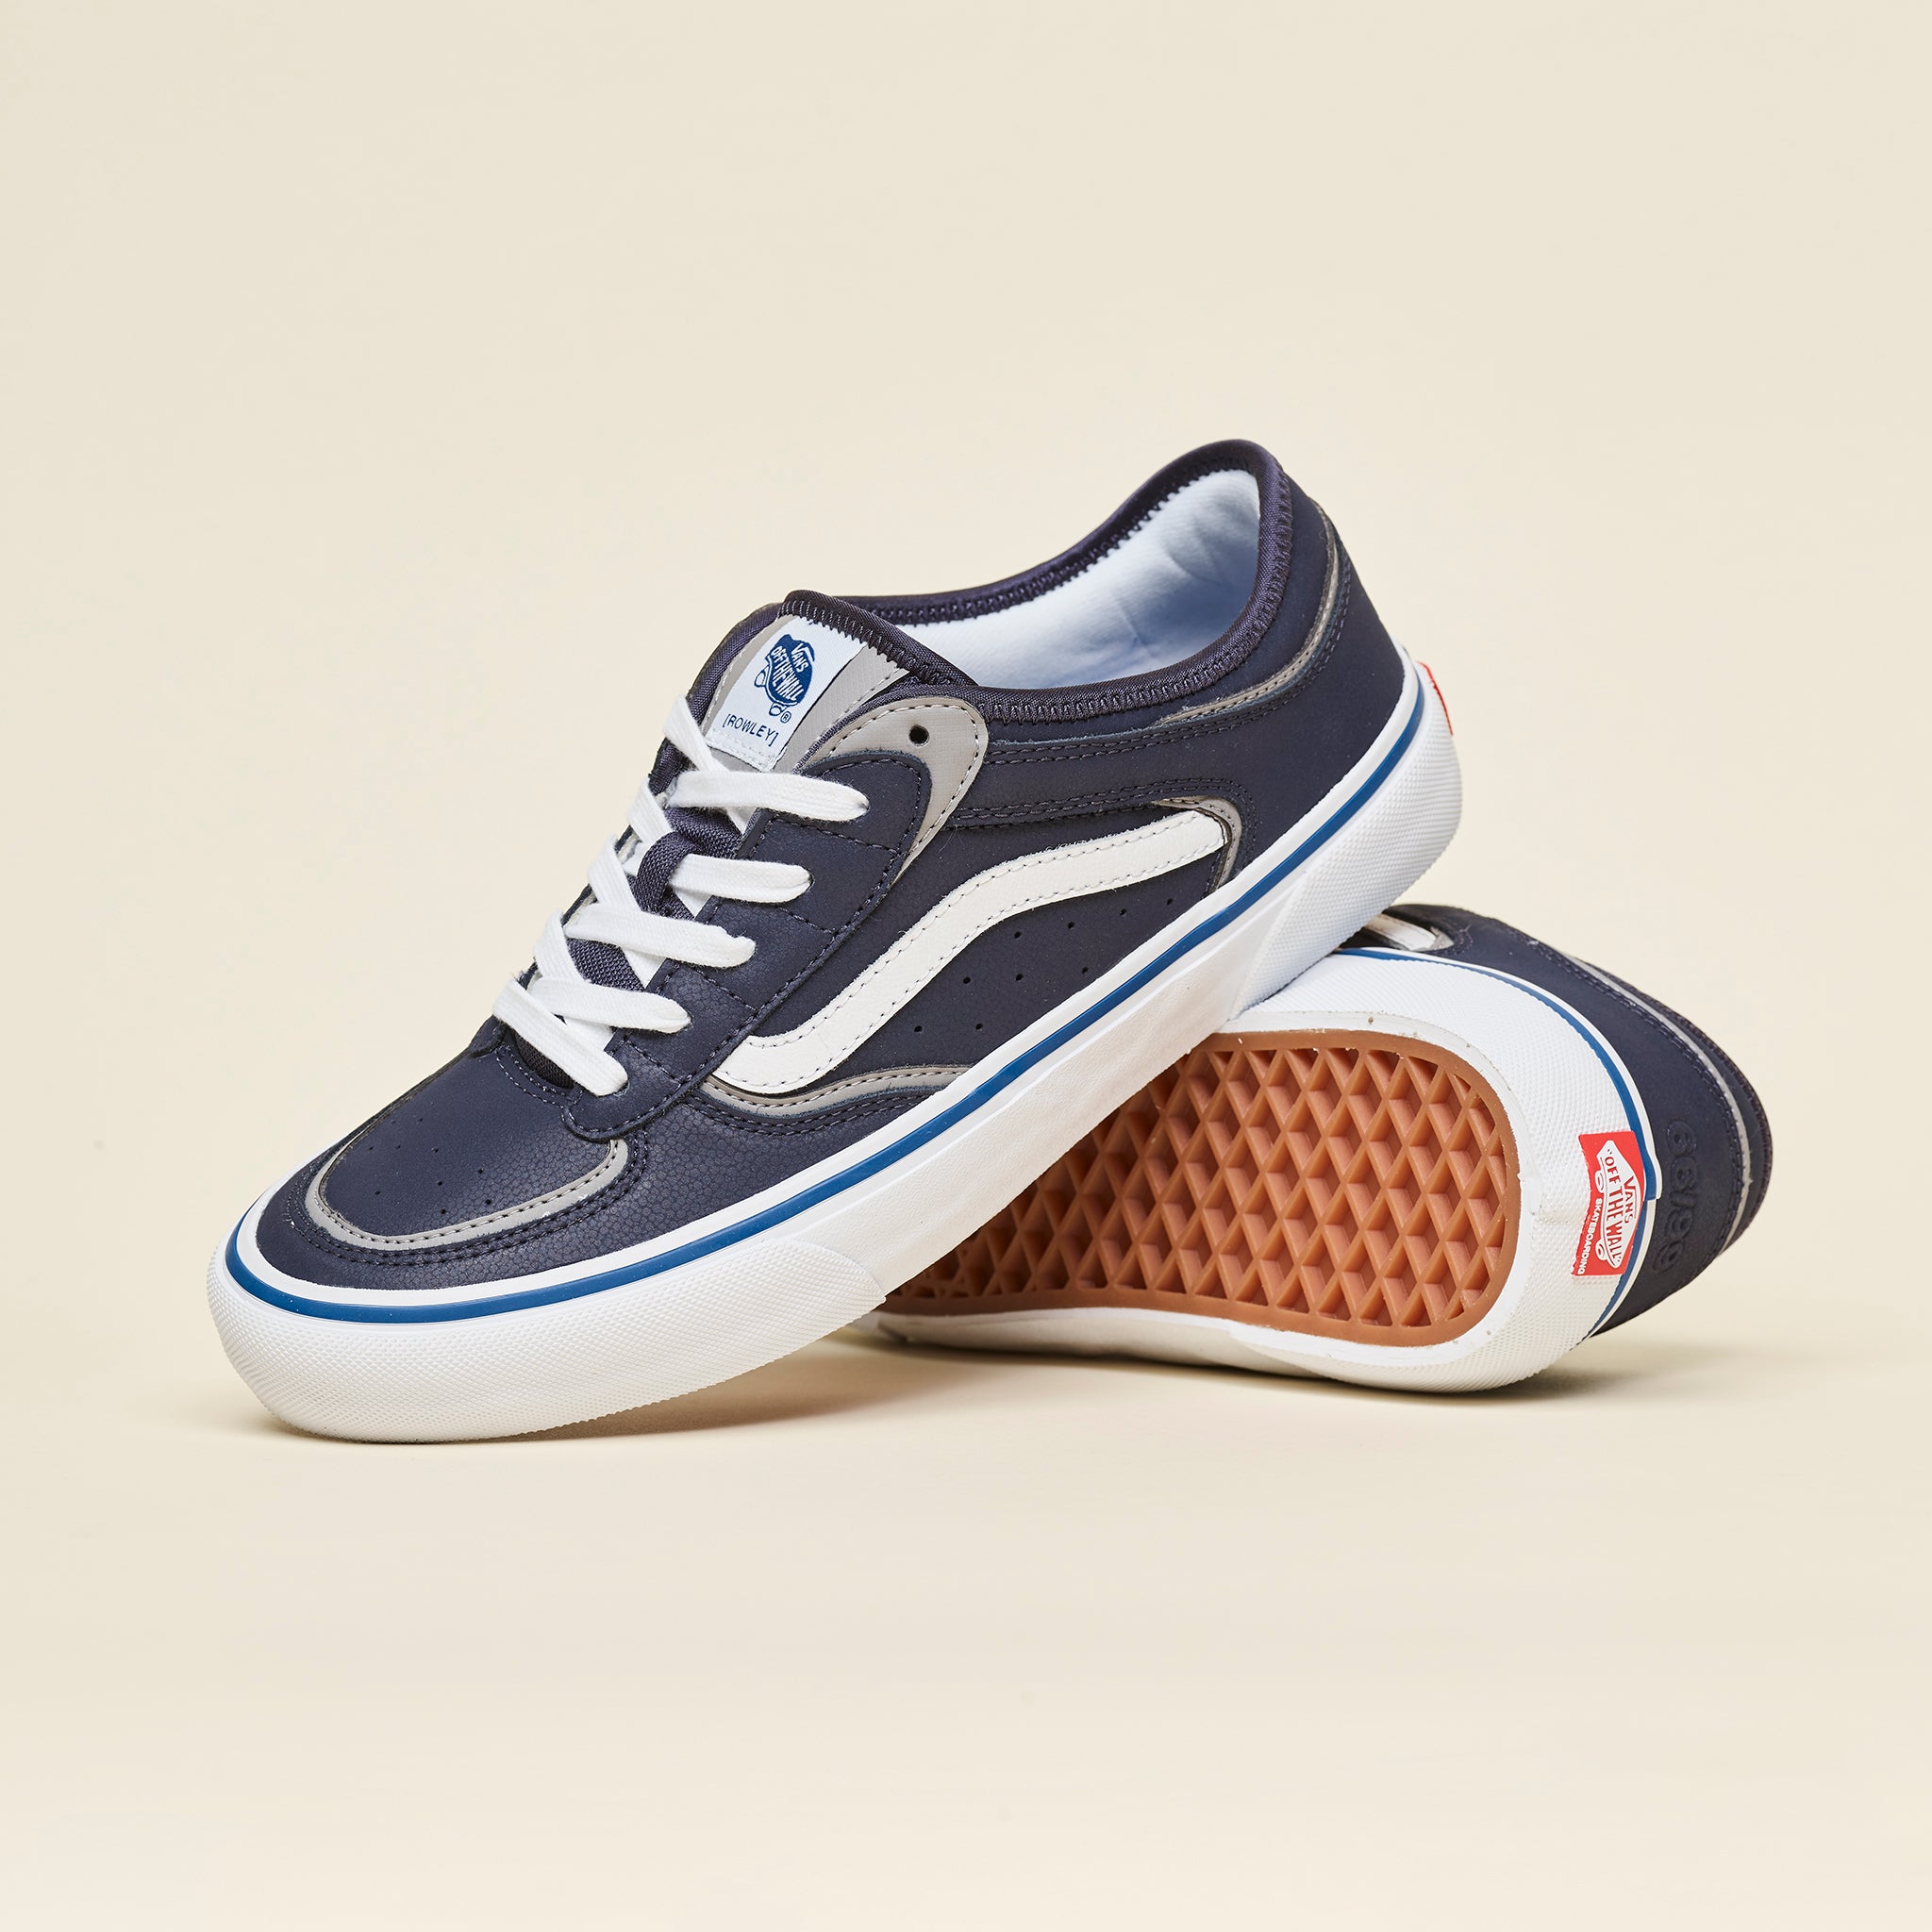 Vans Rowley PRO Classic - Blue/White – FREE DOME 66/99